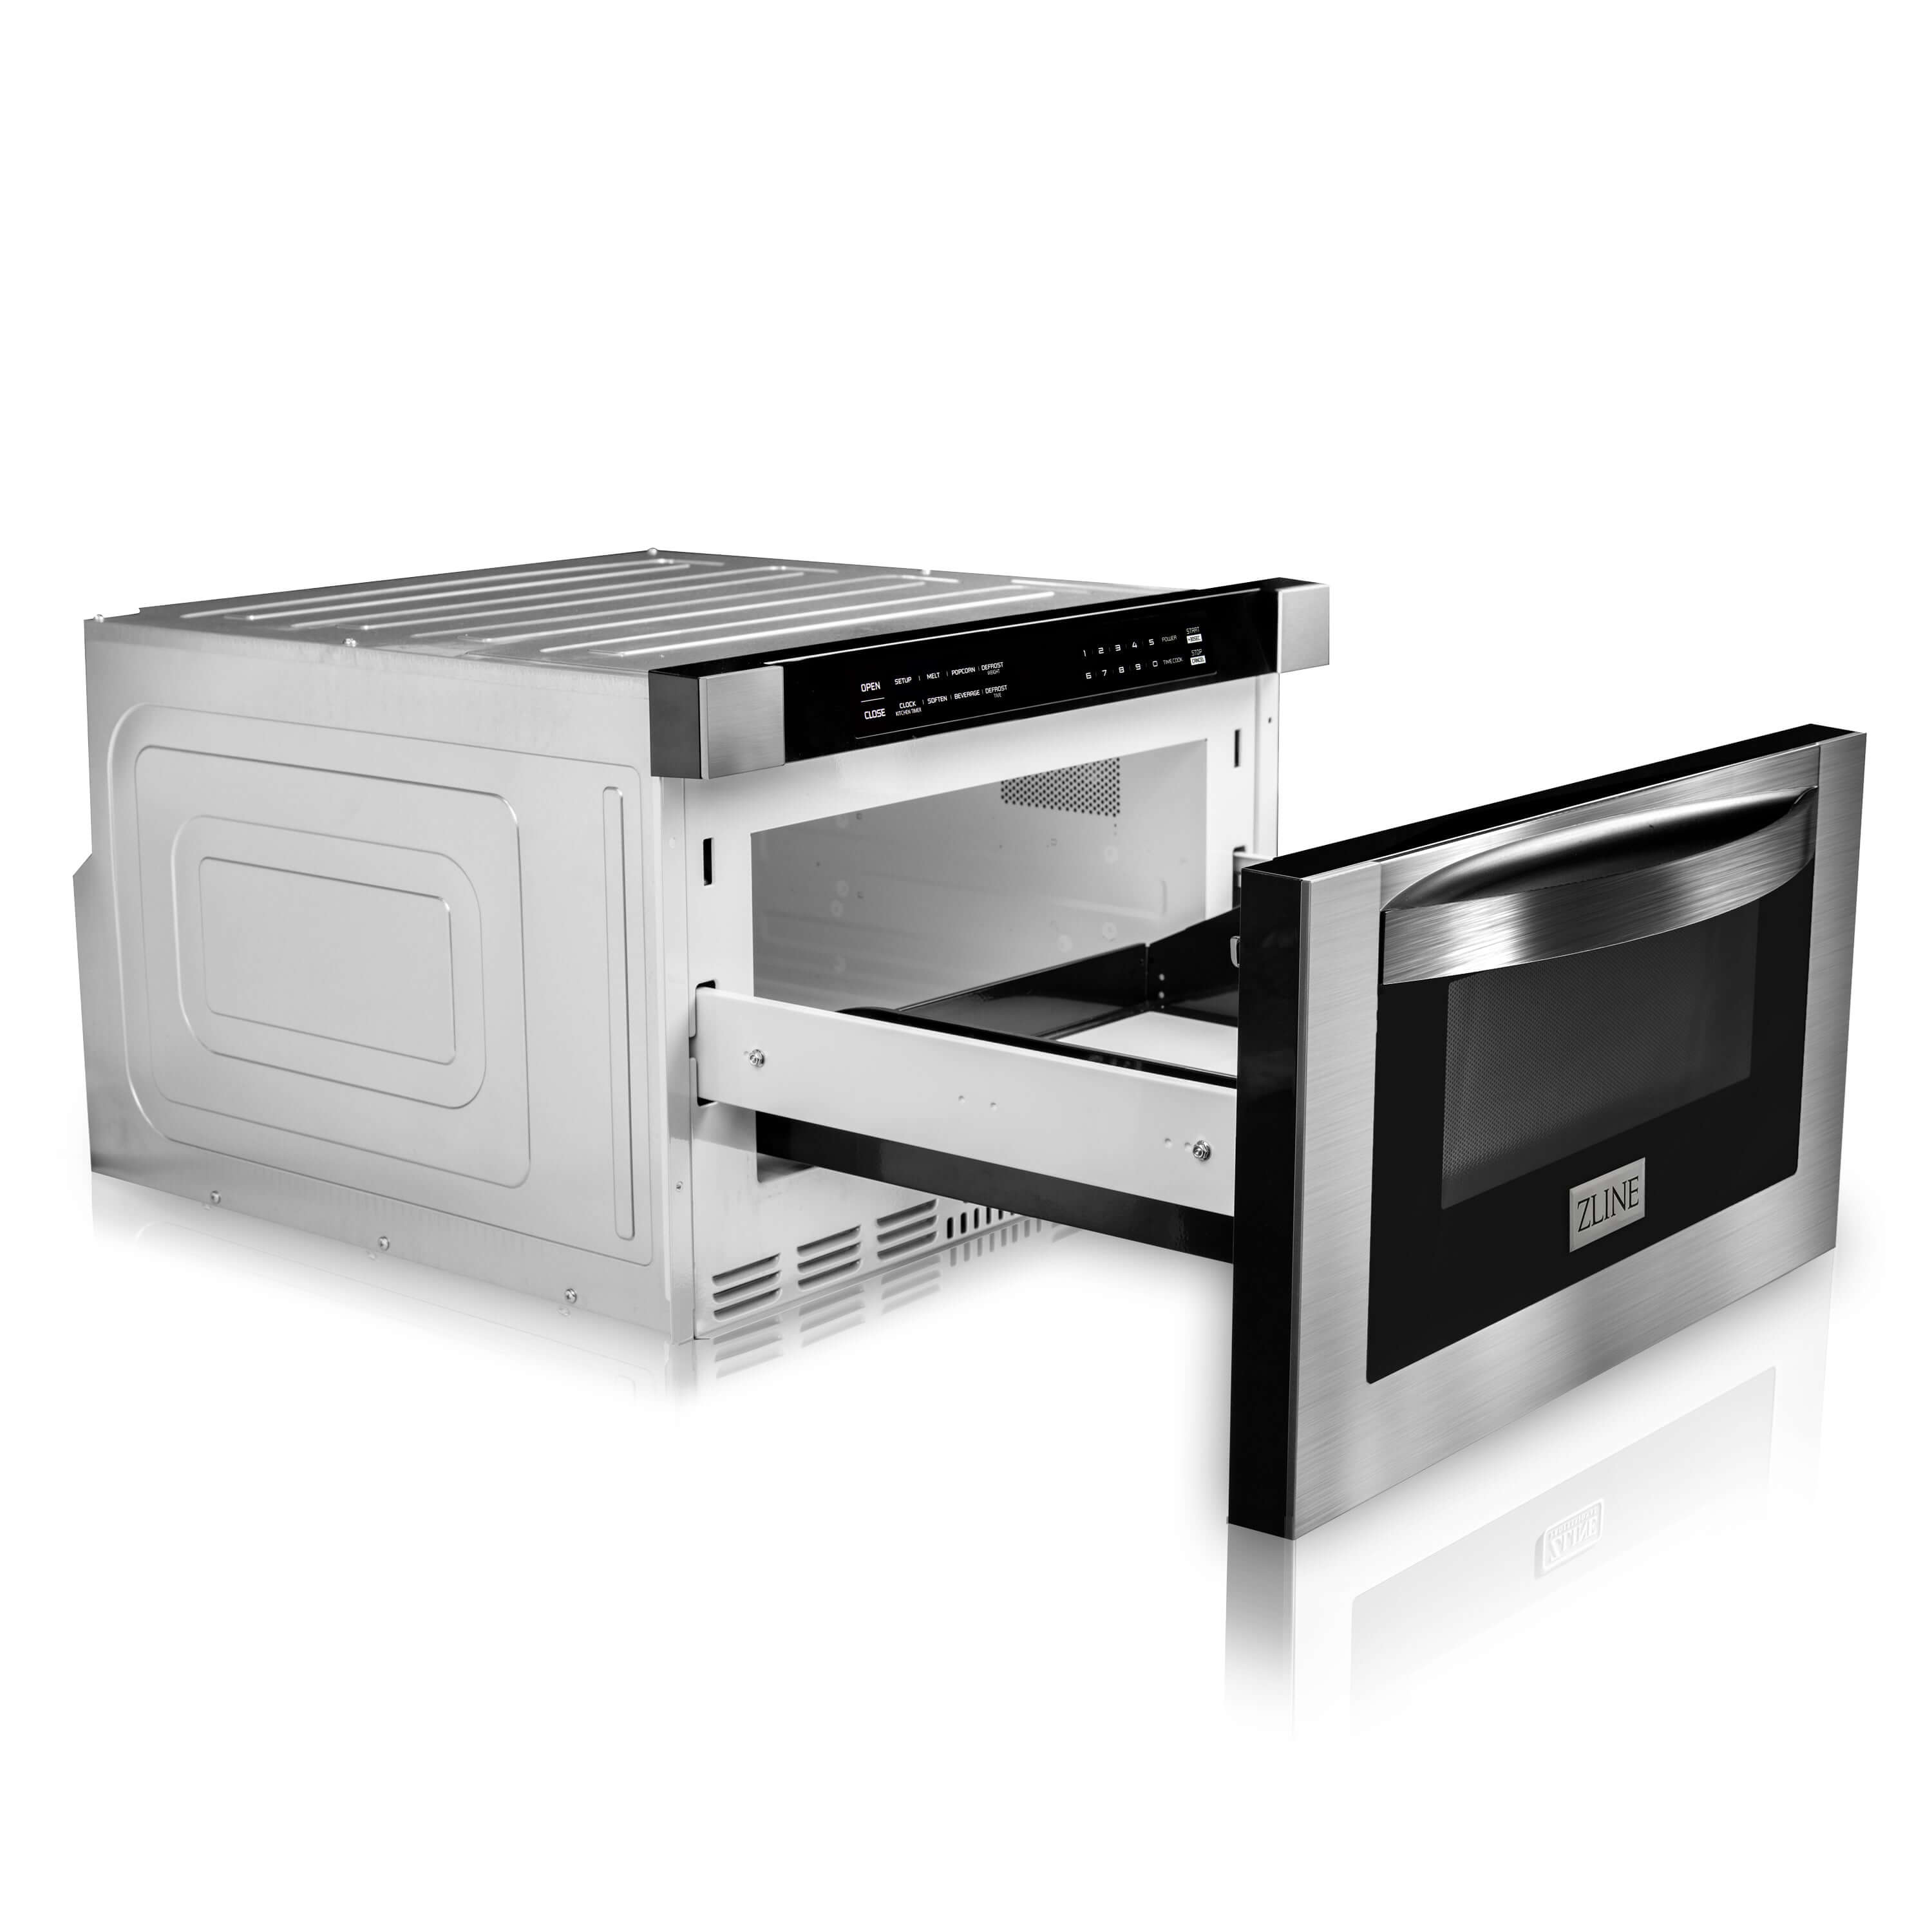 ZLINE 24" microwave drawer side with drawer open.